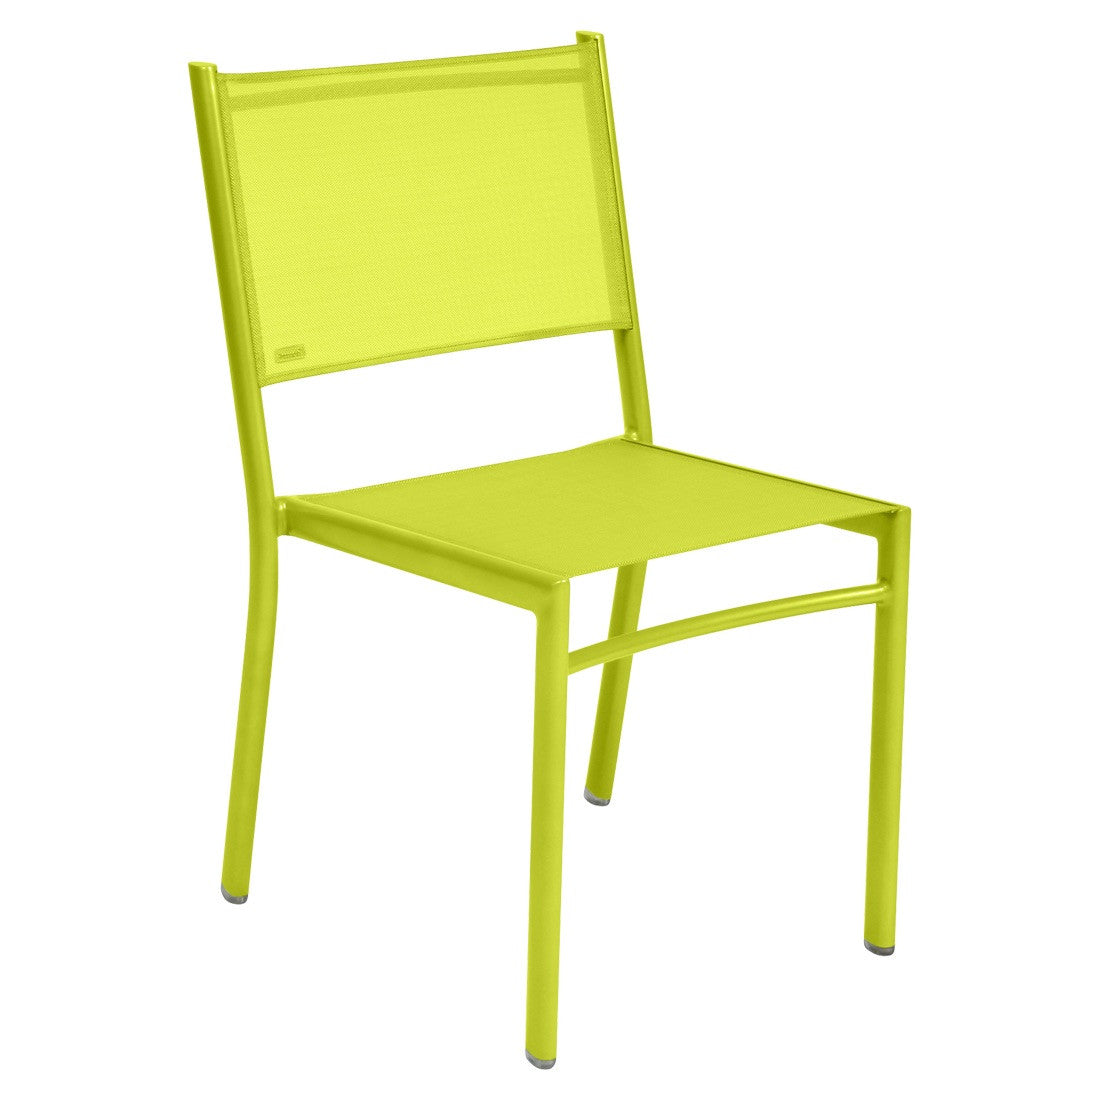 Fermob Costa Stacking Dining Chair - bonmarche